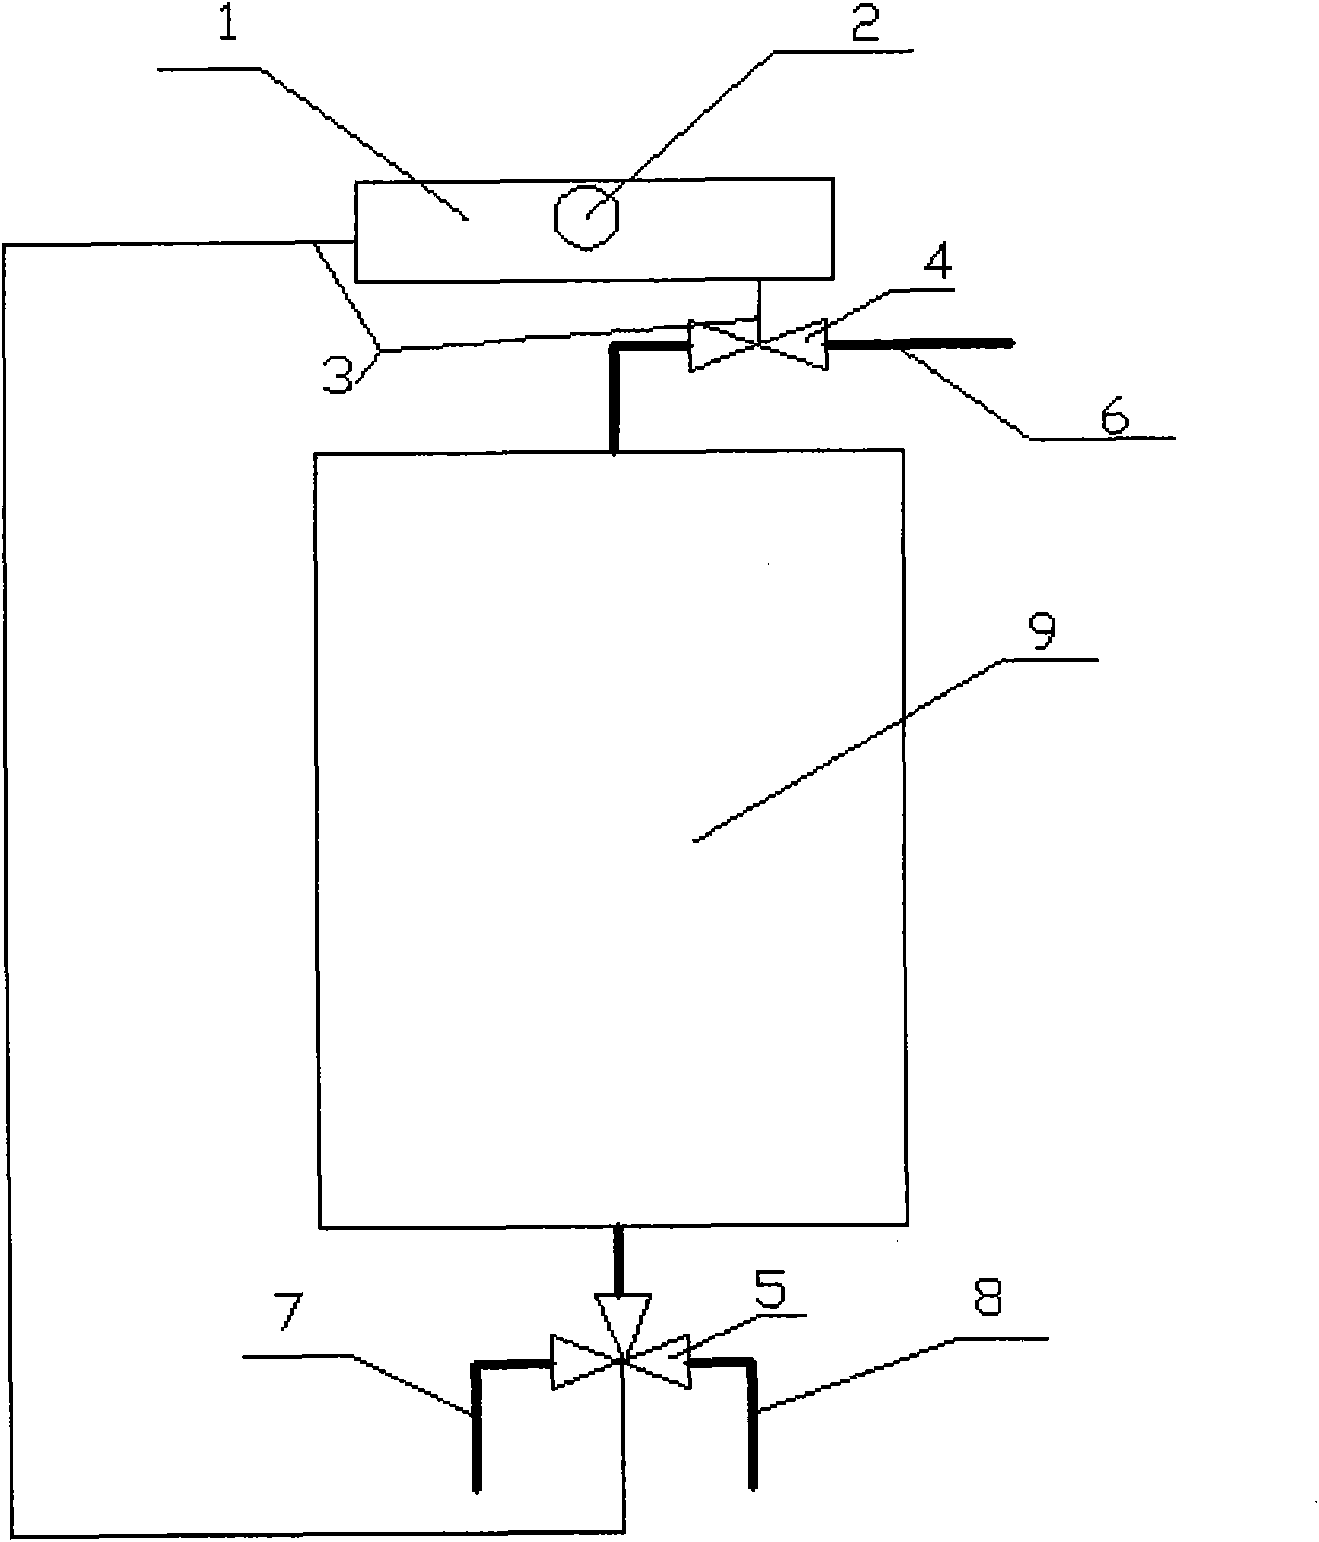 Equipment capable of automatically separating and collecting urine in urinal